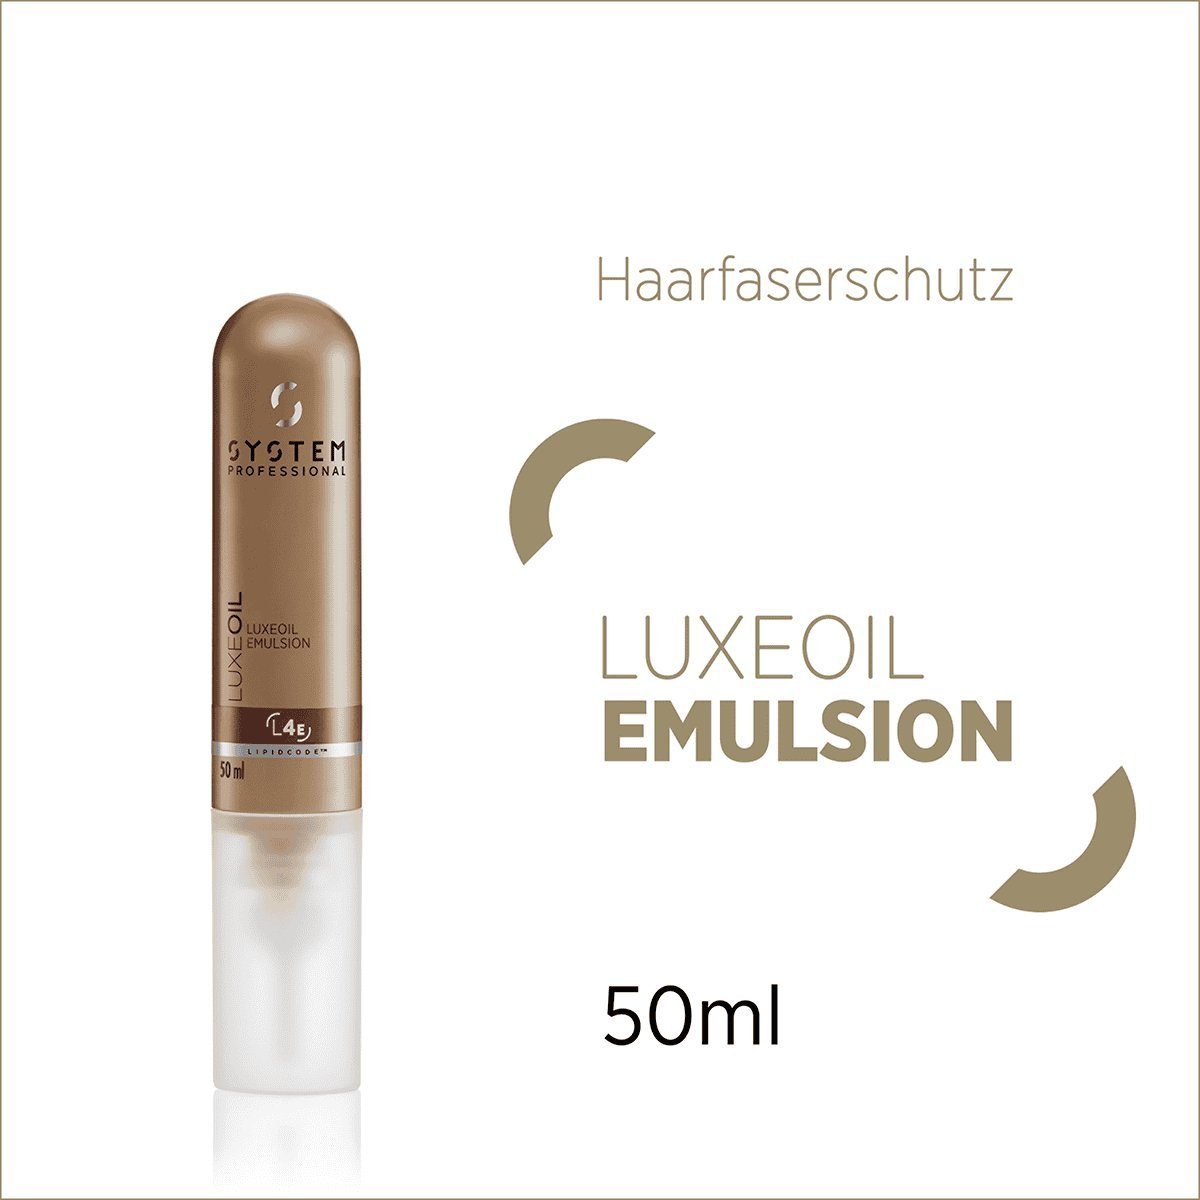 Haarkur System Professional Professional Emulsion System L4e Luxeoil